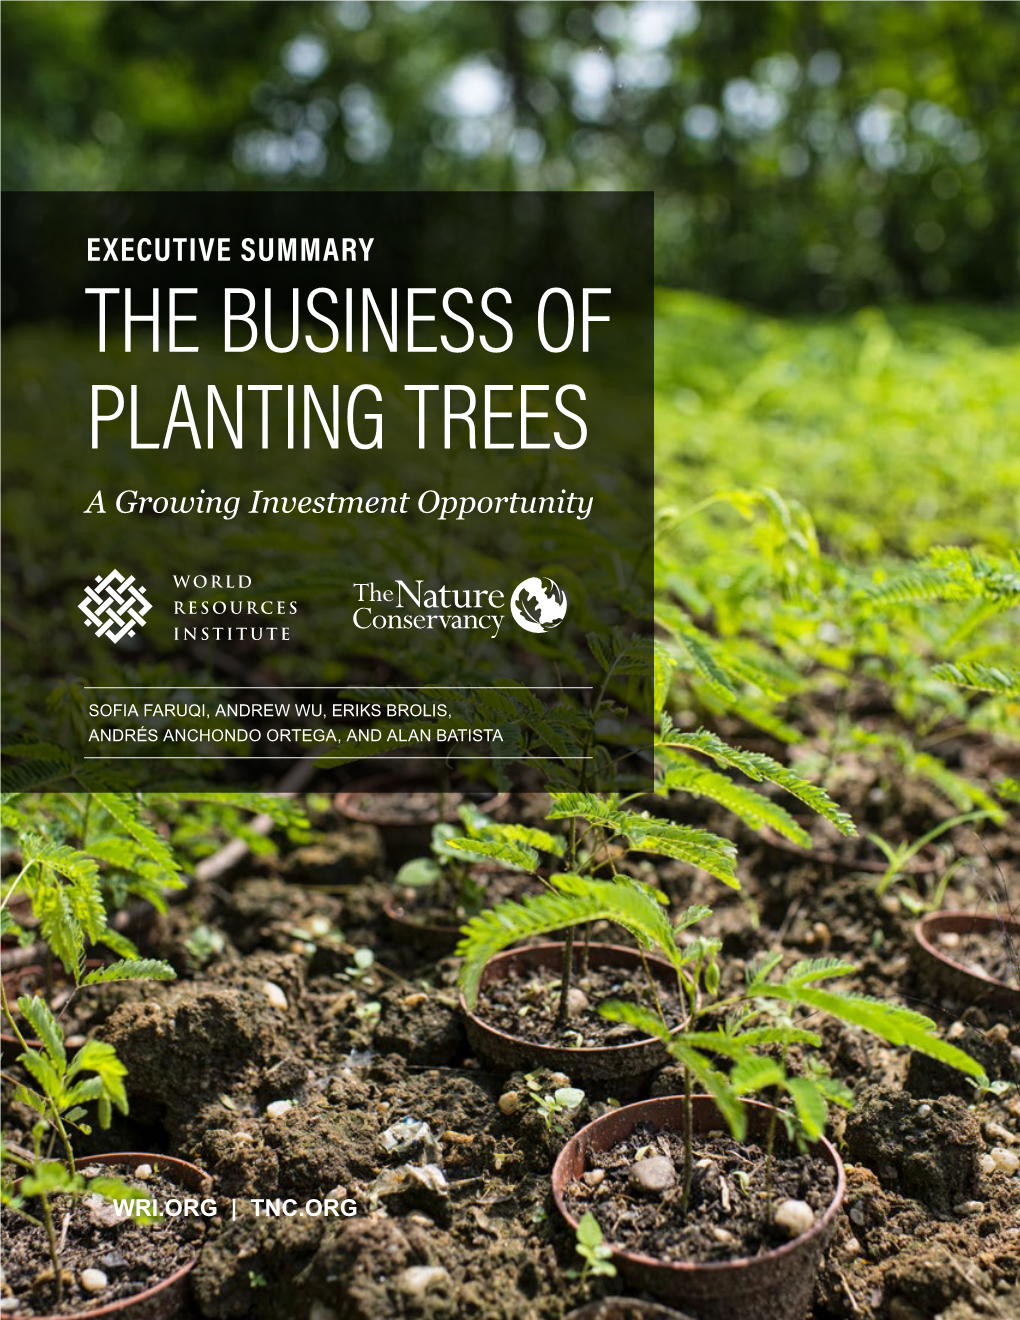 THE BUSINESS of PLANTING TREES a Growing Investment Opportunity